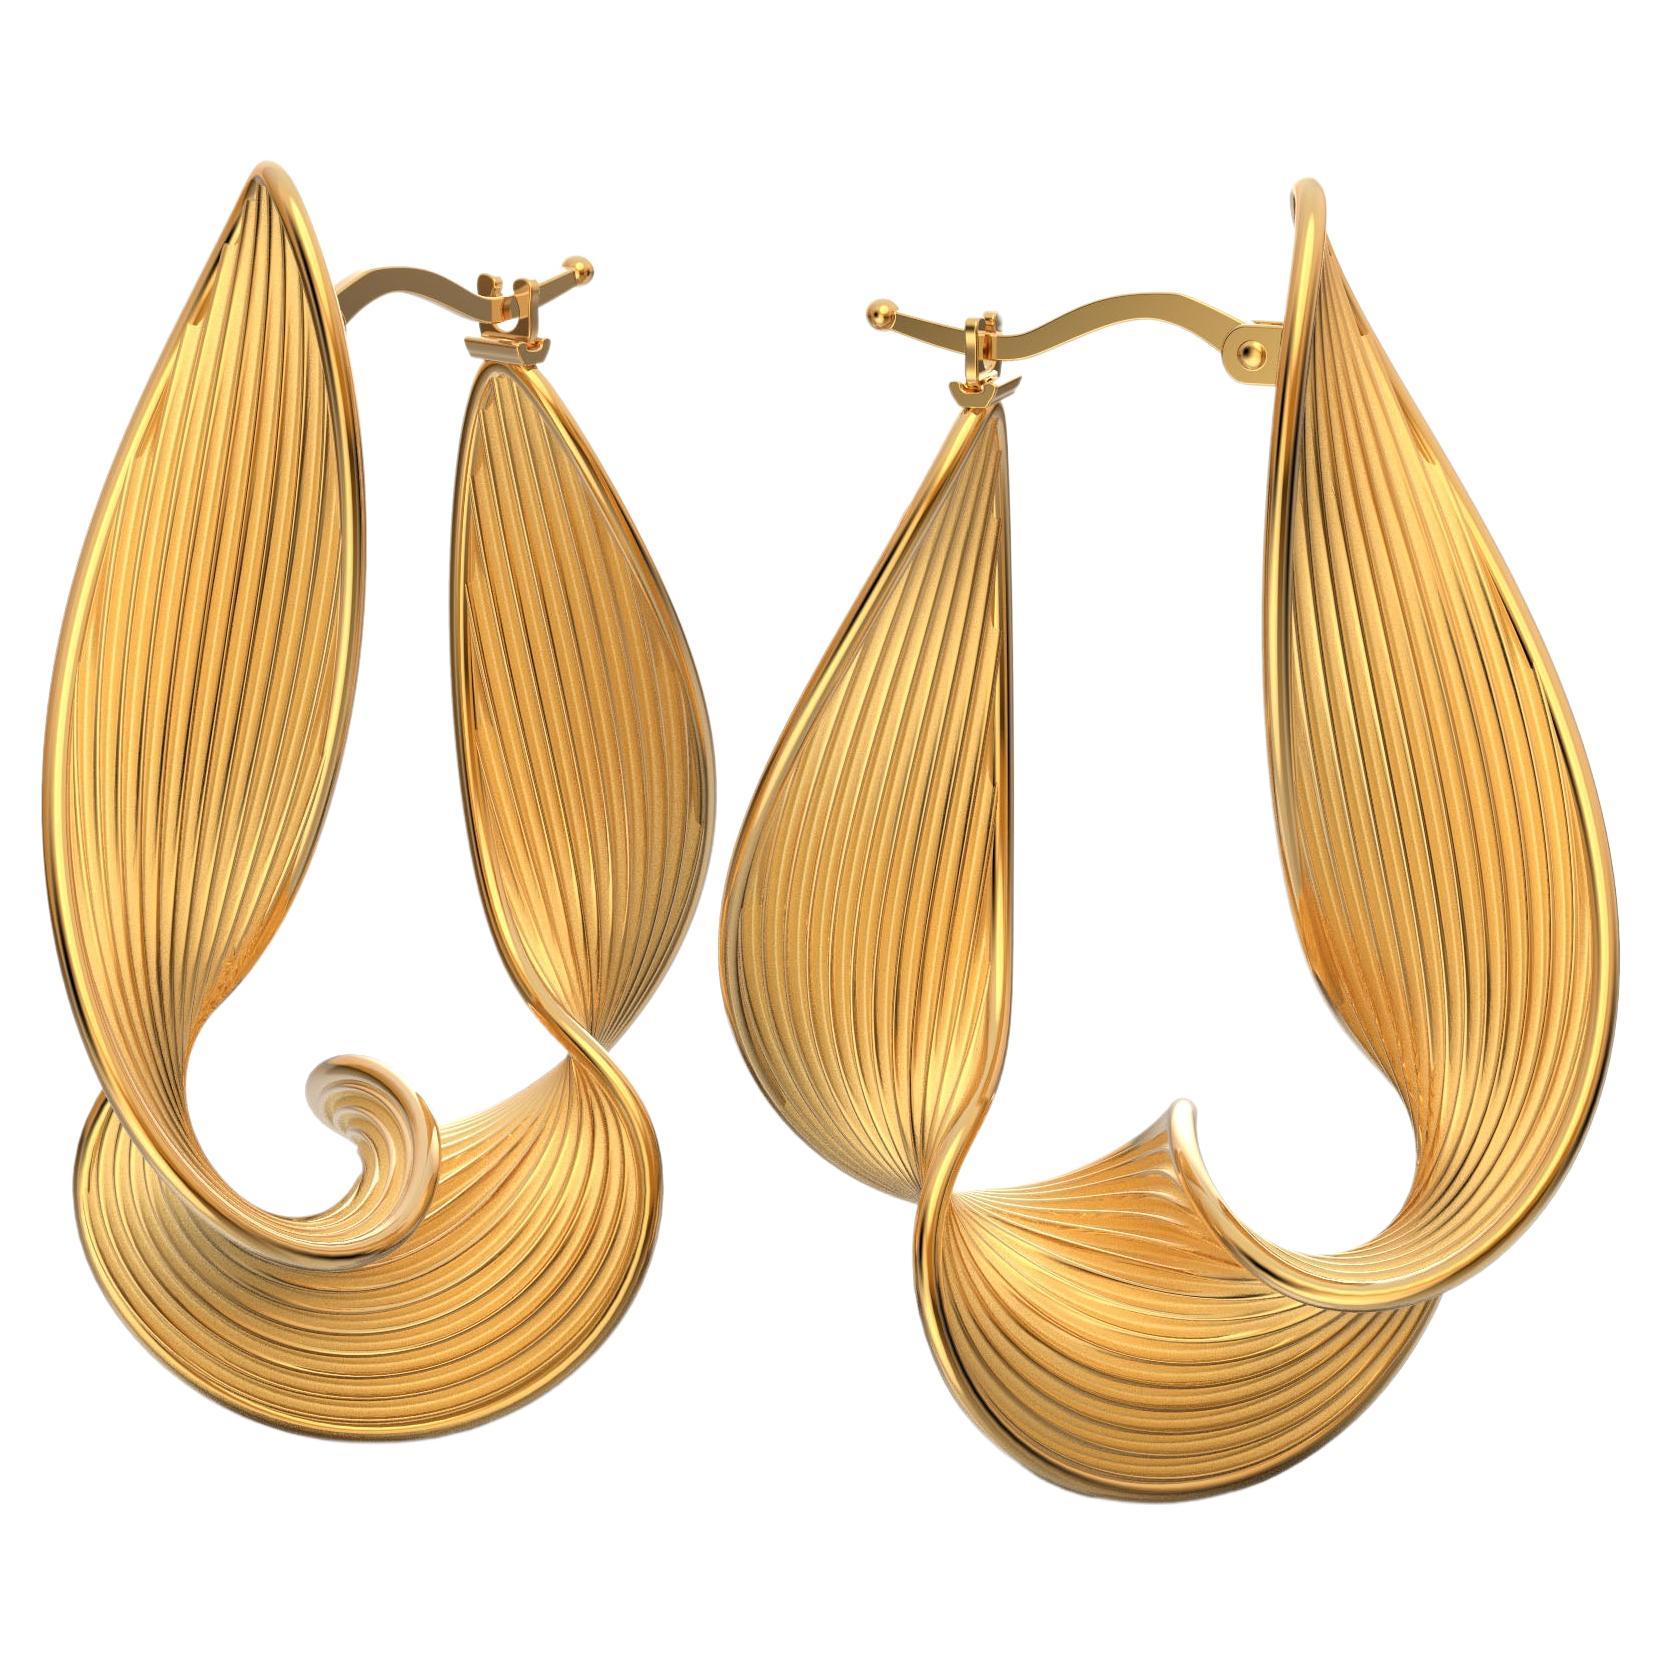 Stunning 18k Gold Twisted Hoop Earrings by Oltremare Gioielli Italian Jewelry For Sale